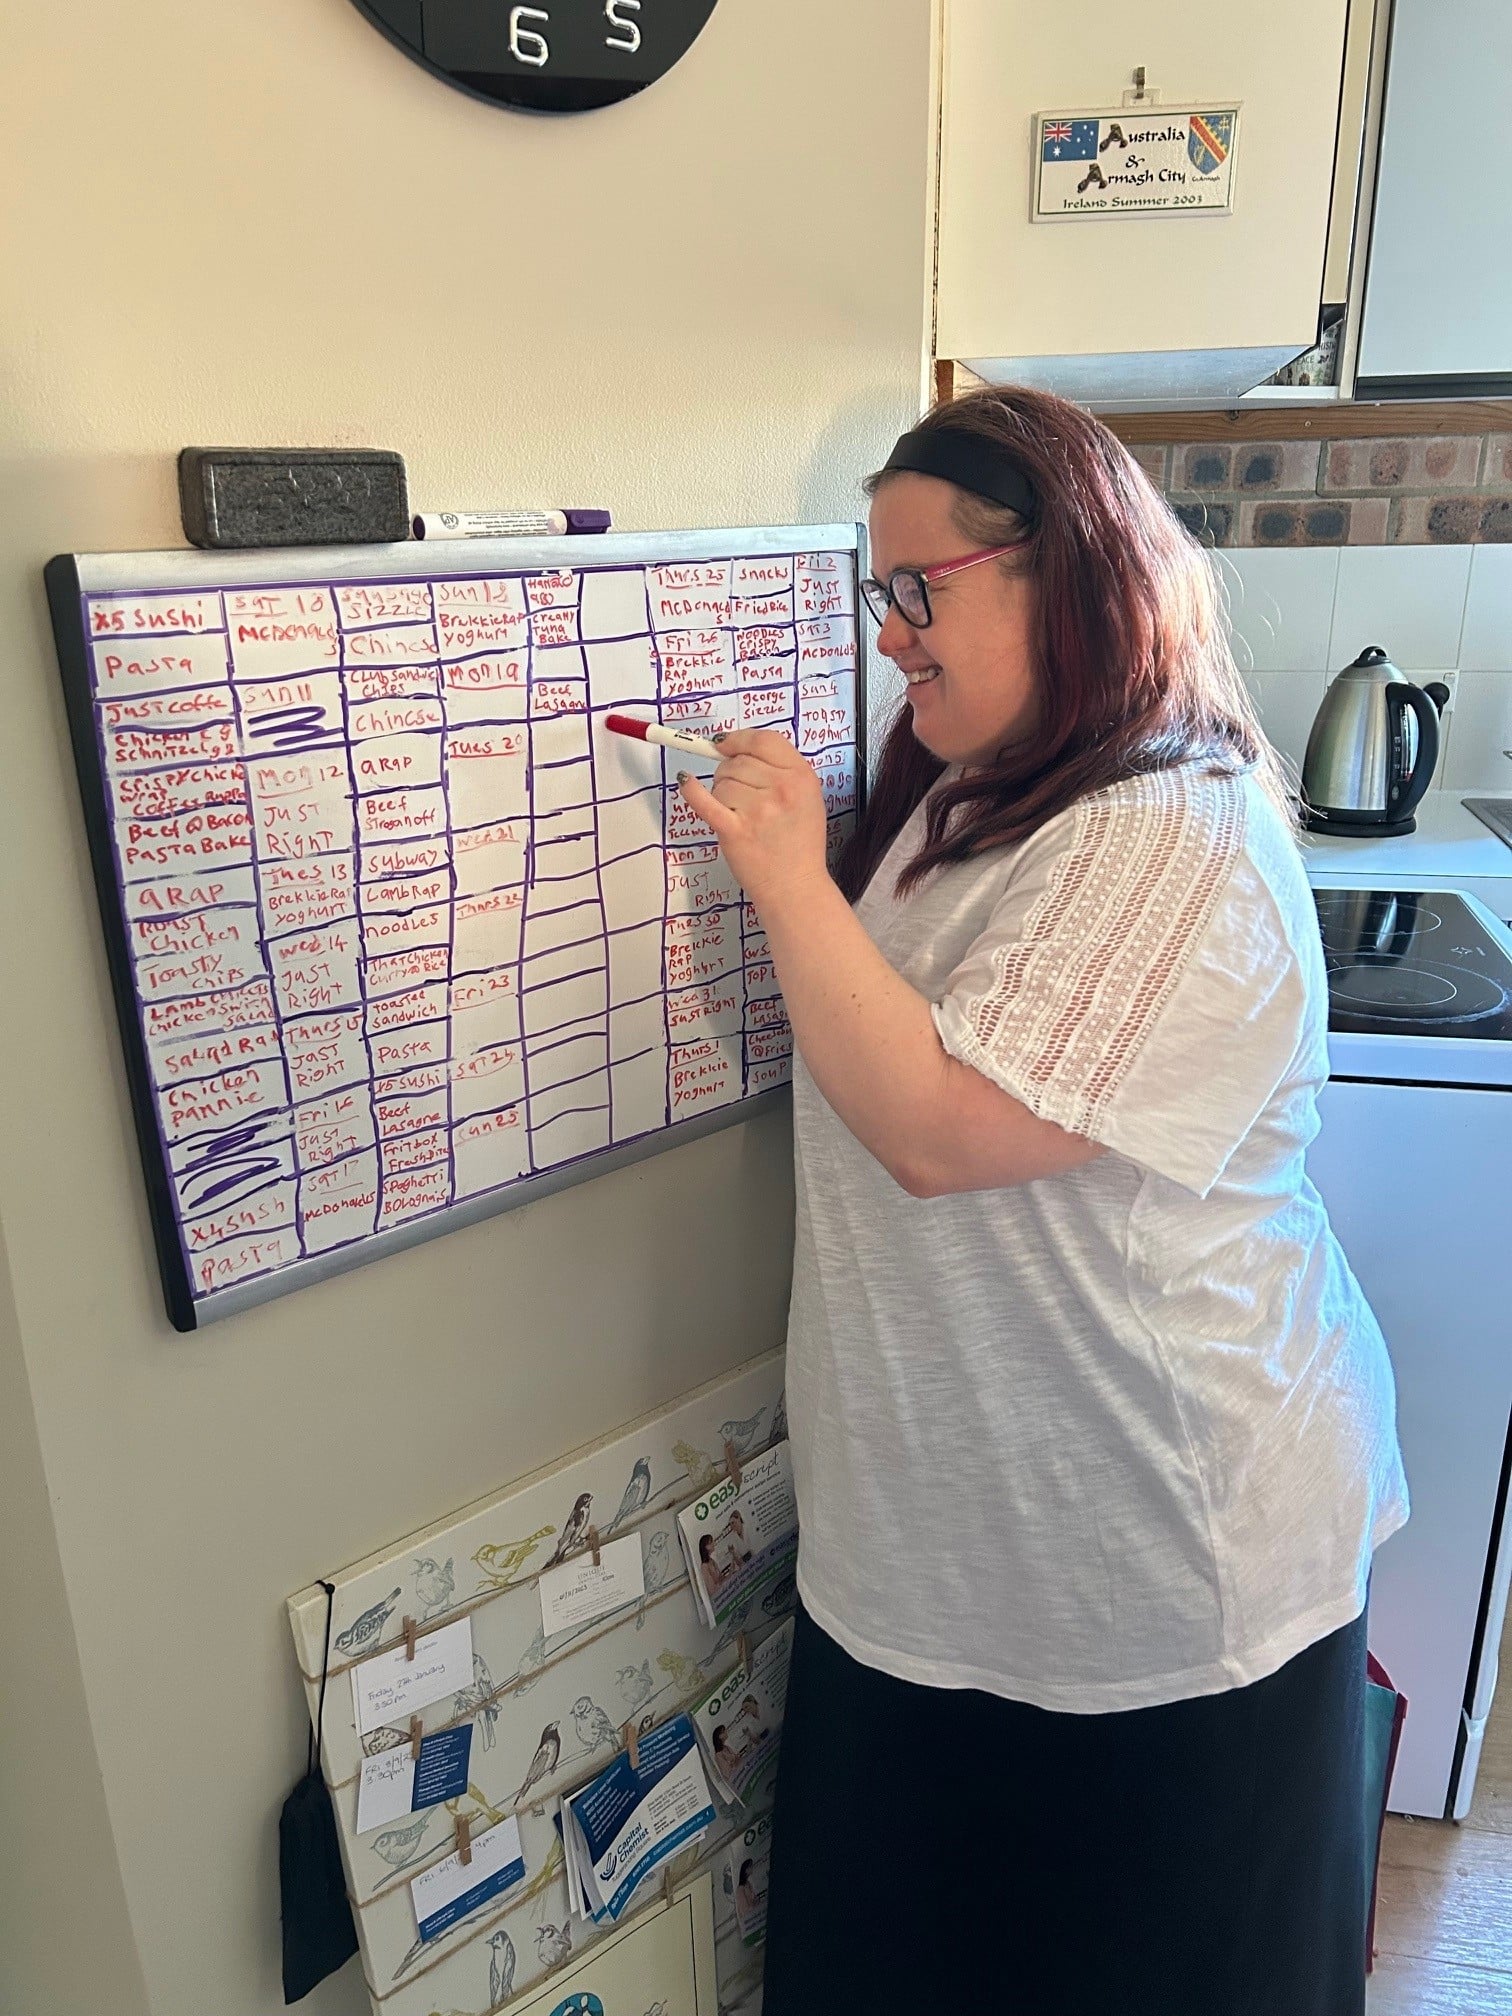 Woman with Down syndrome writing chores on a whiteboard